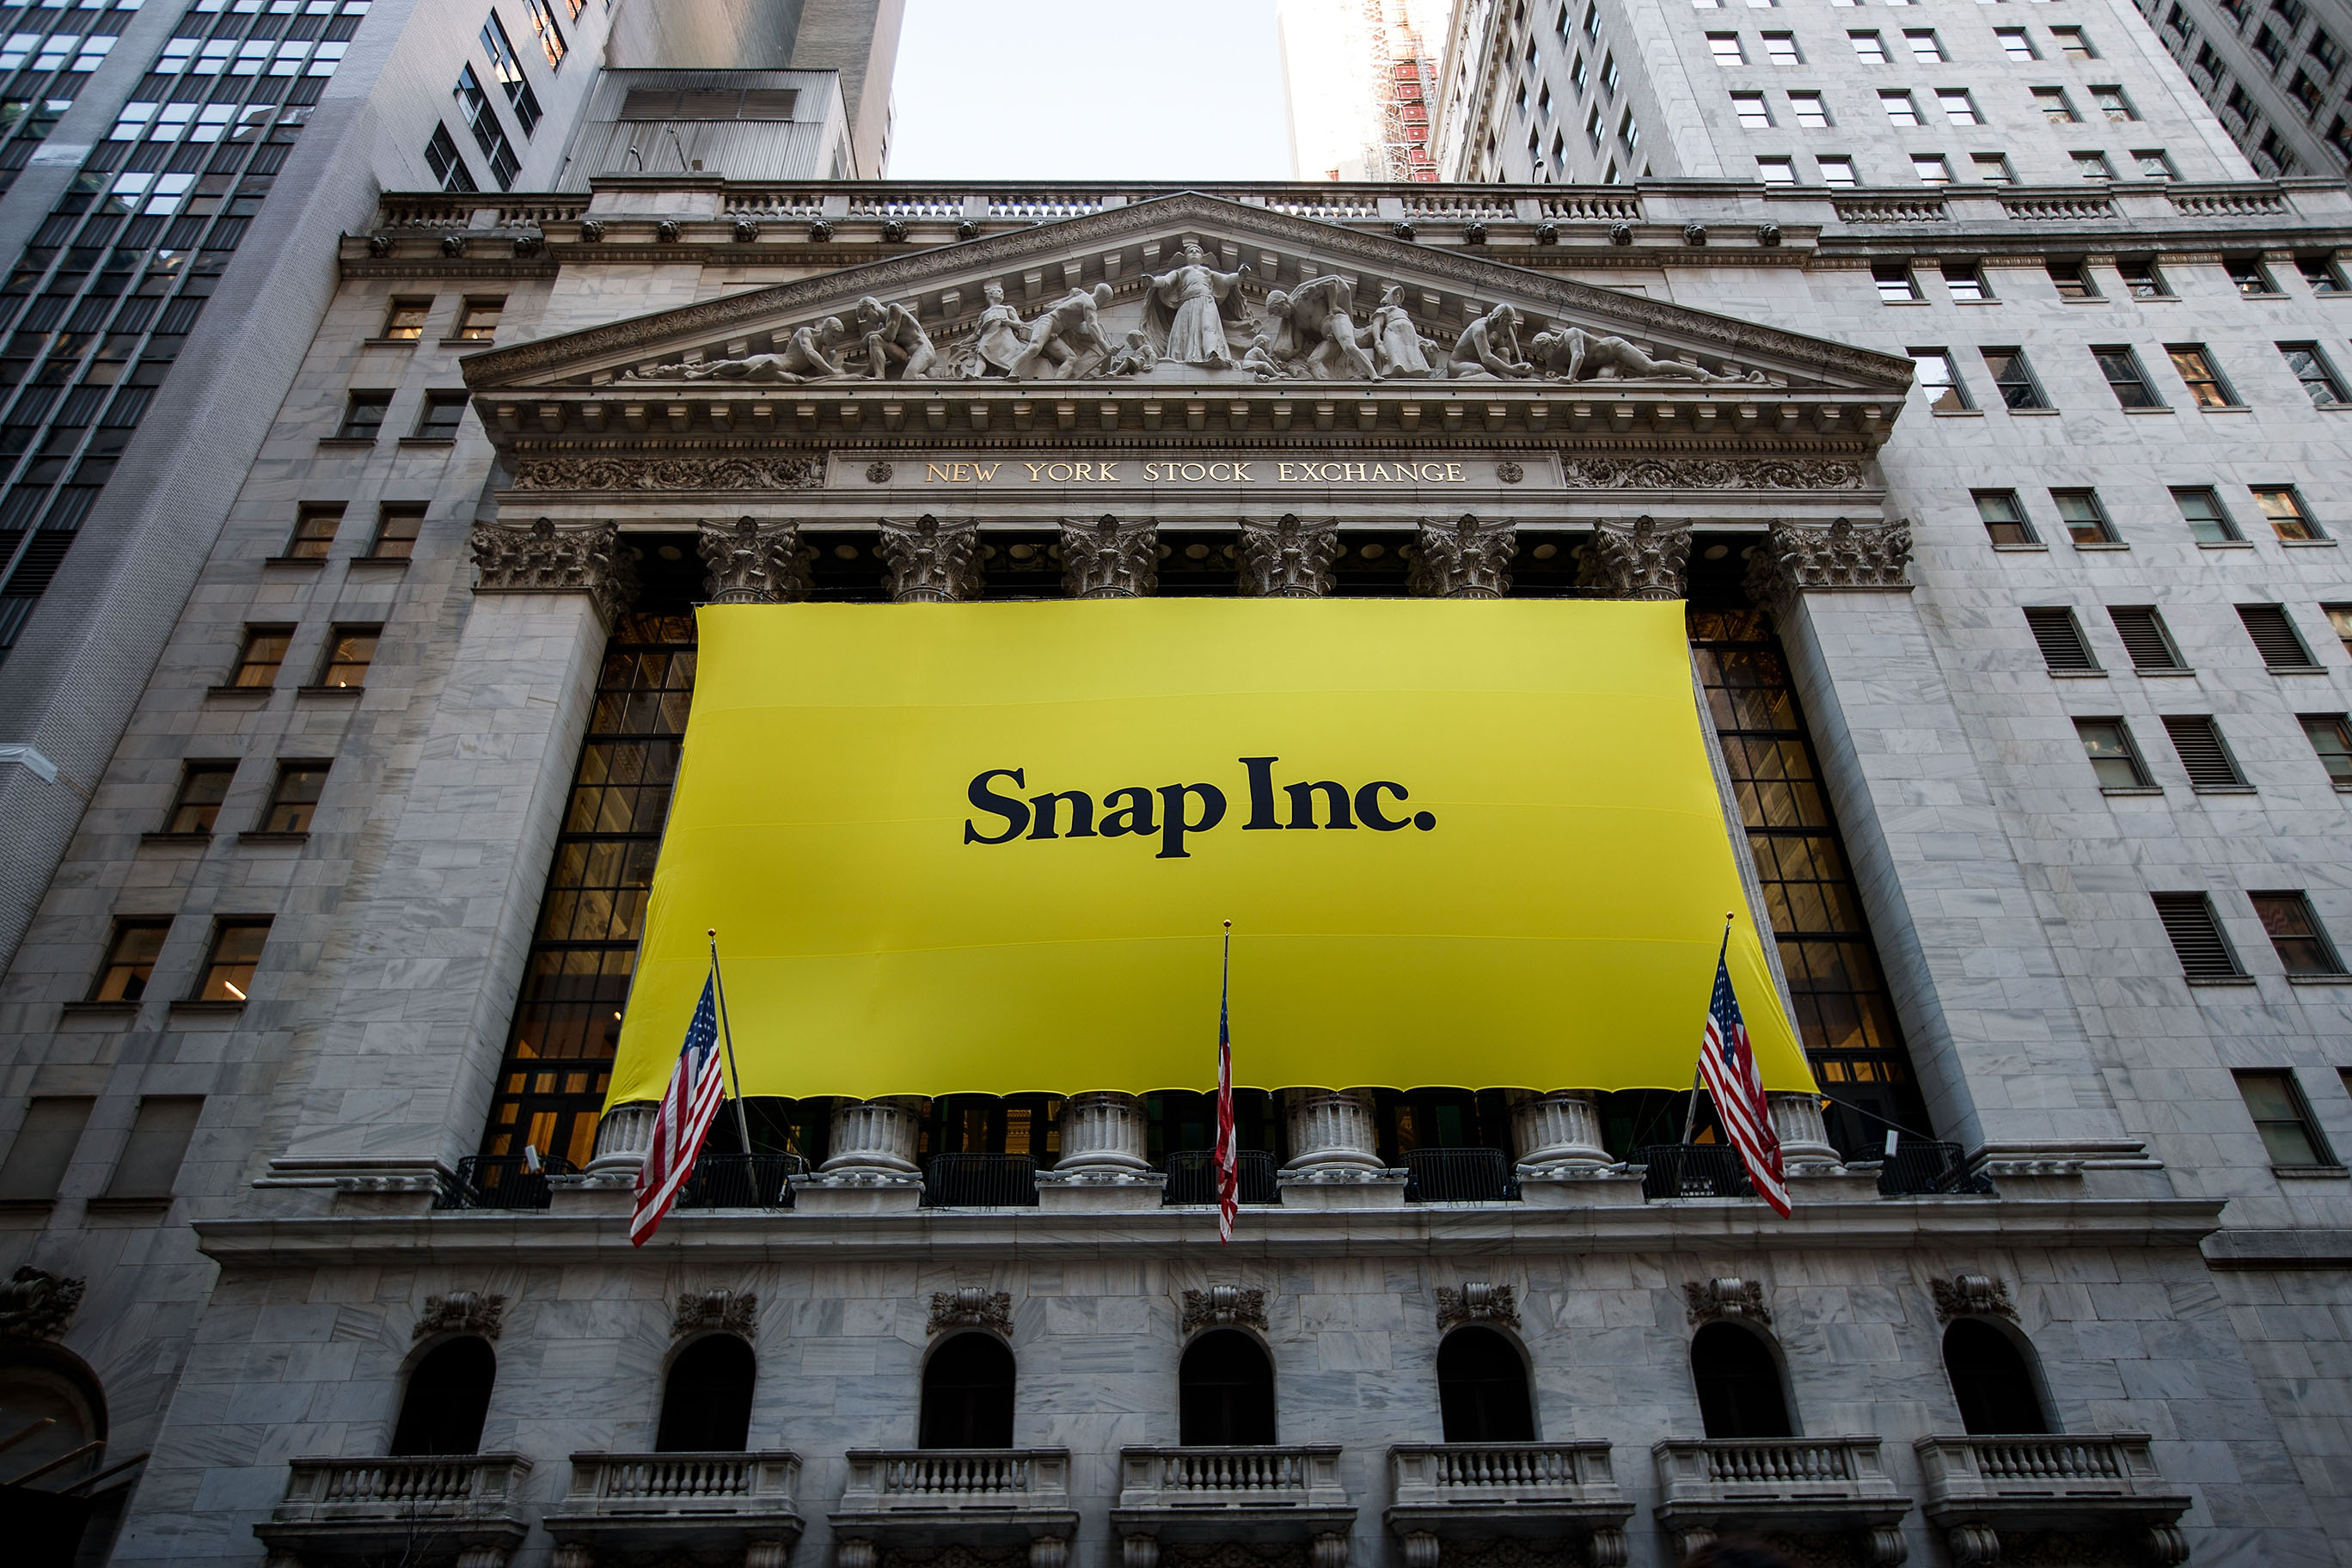 Tencent could play a role redesigning Snapchat following $2B investment